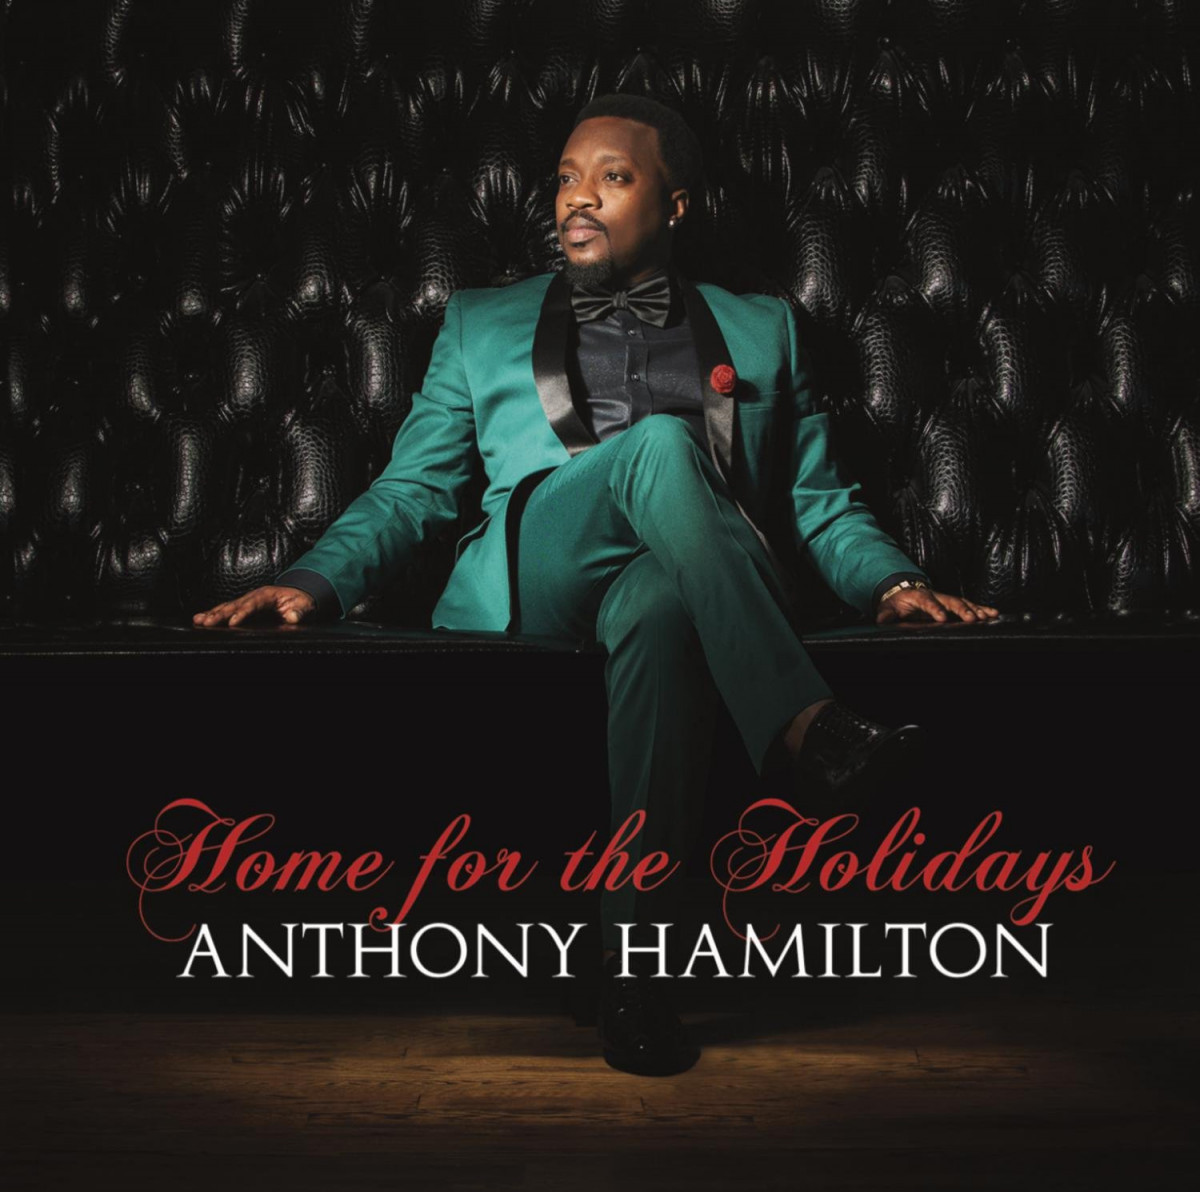 Anthony Hamilton - Please come home for Christmas